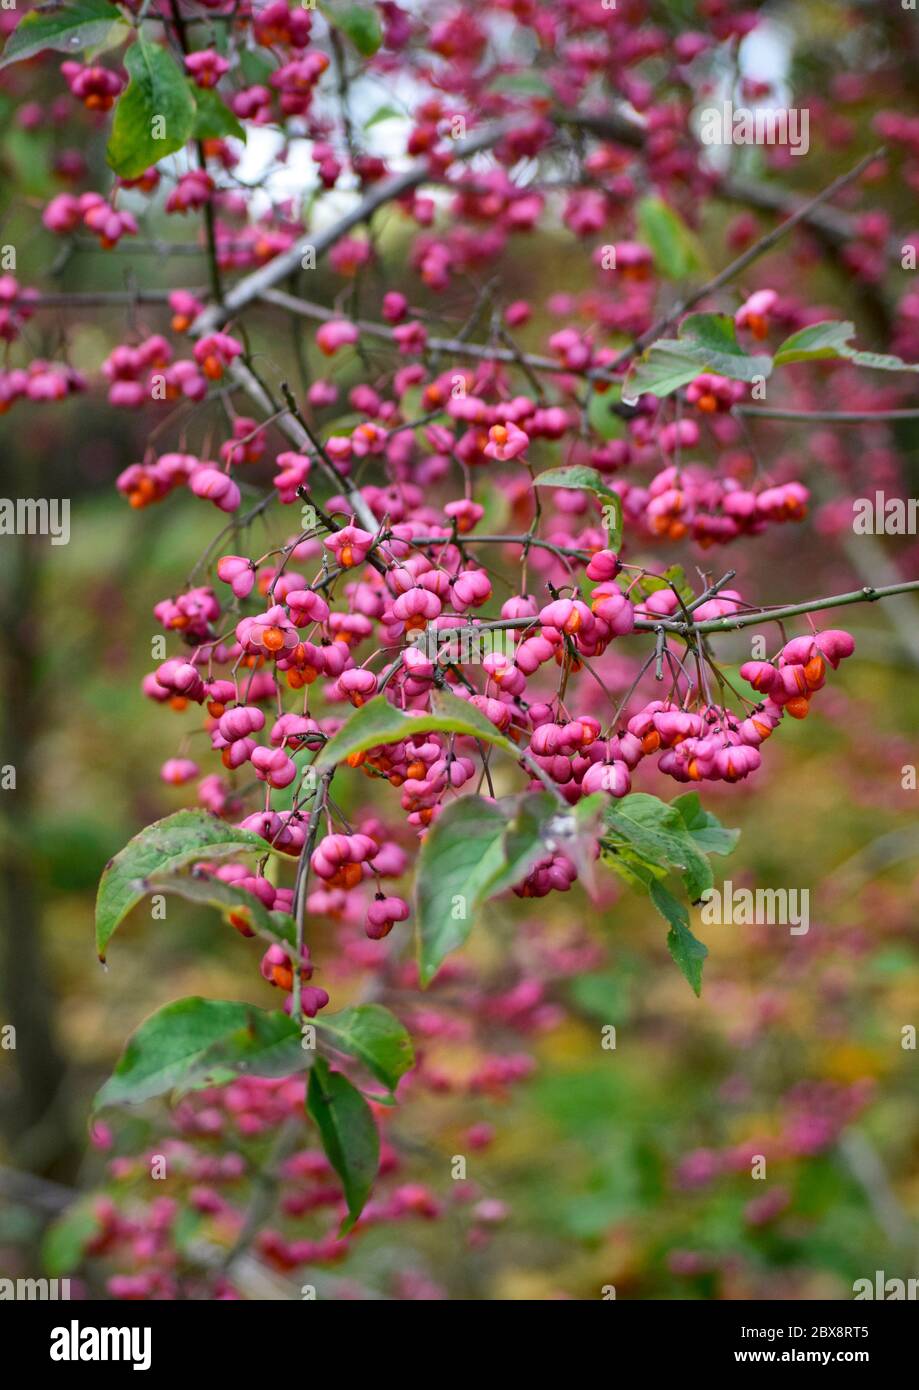 fruits of the spindle tree in autumn Stock Photo